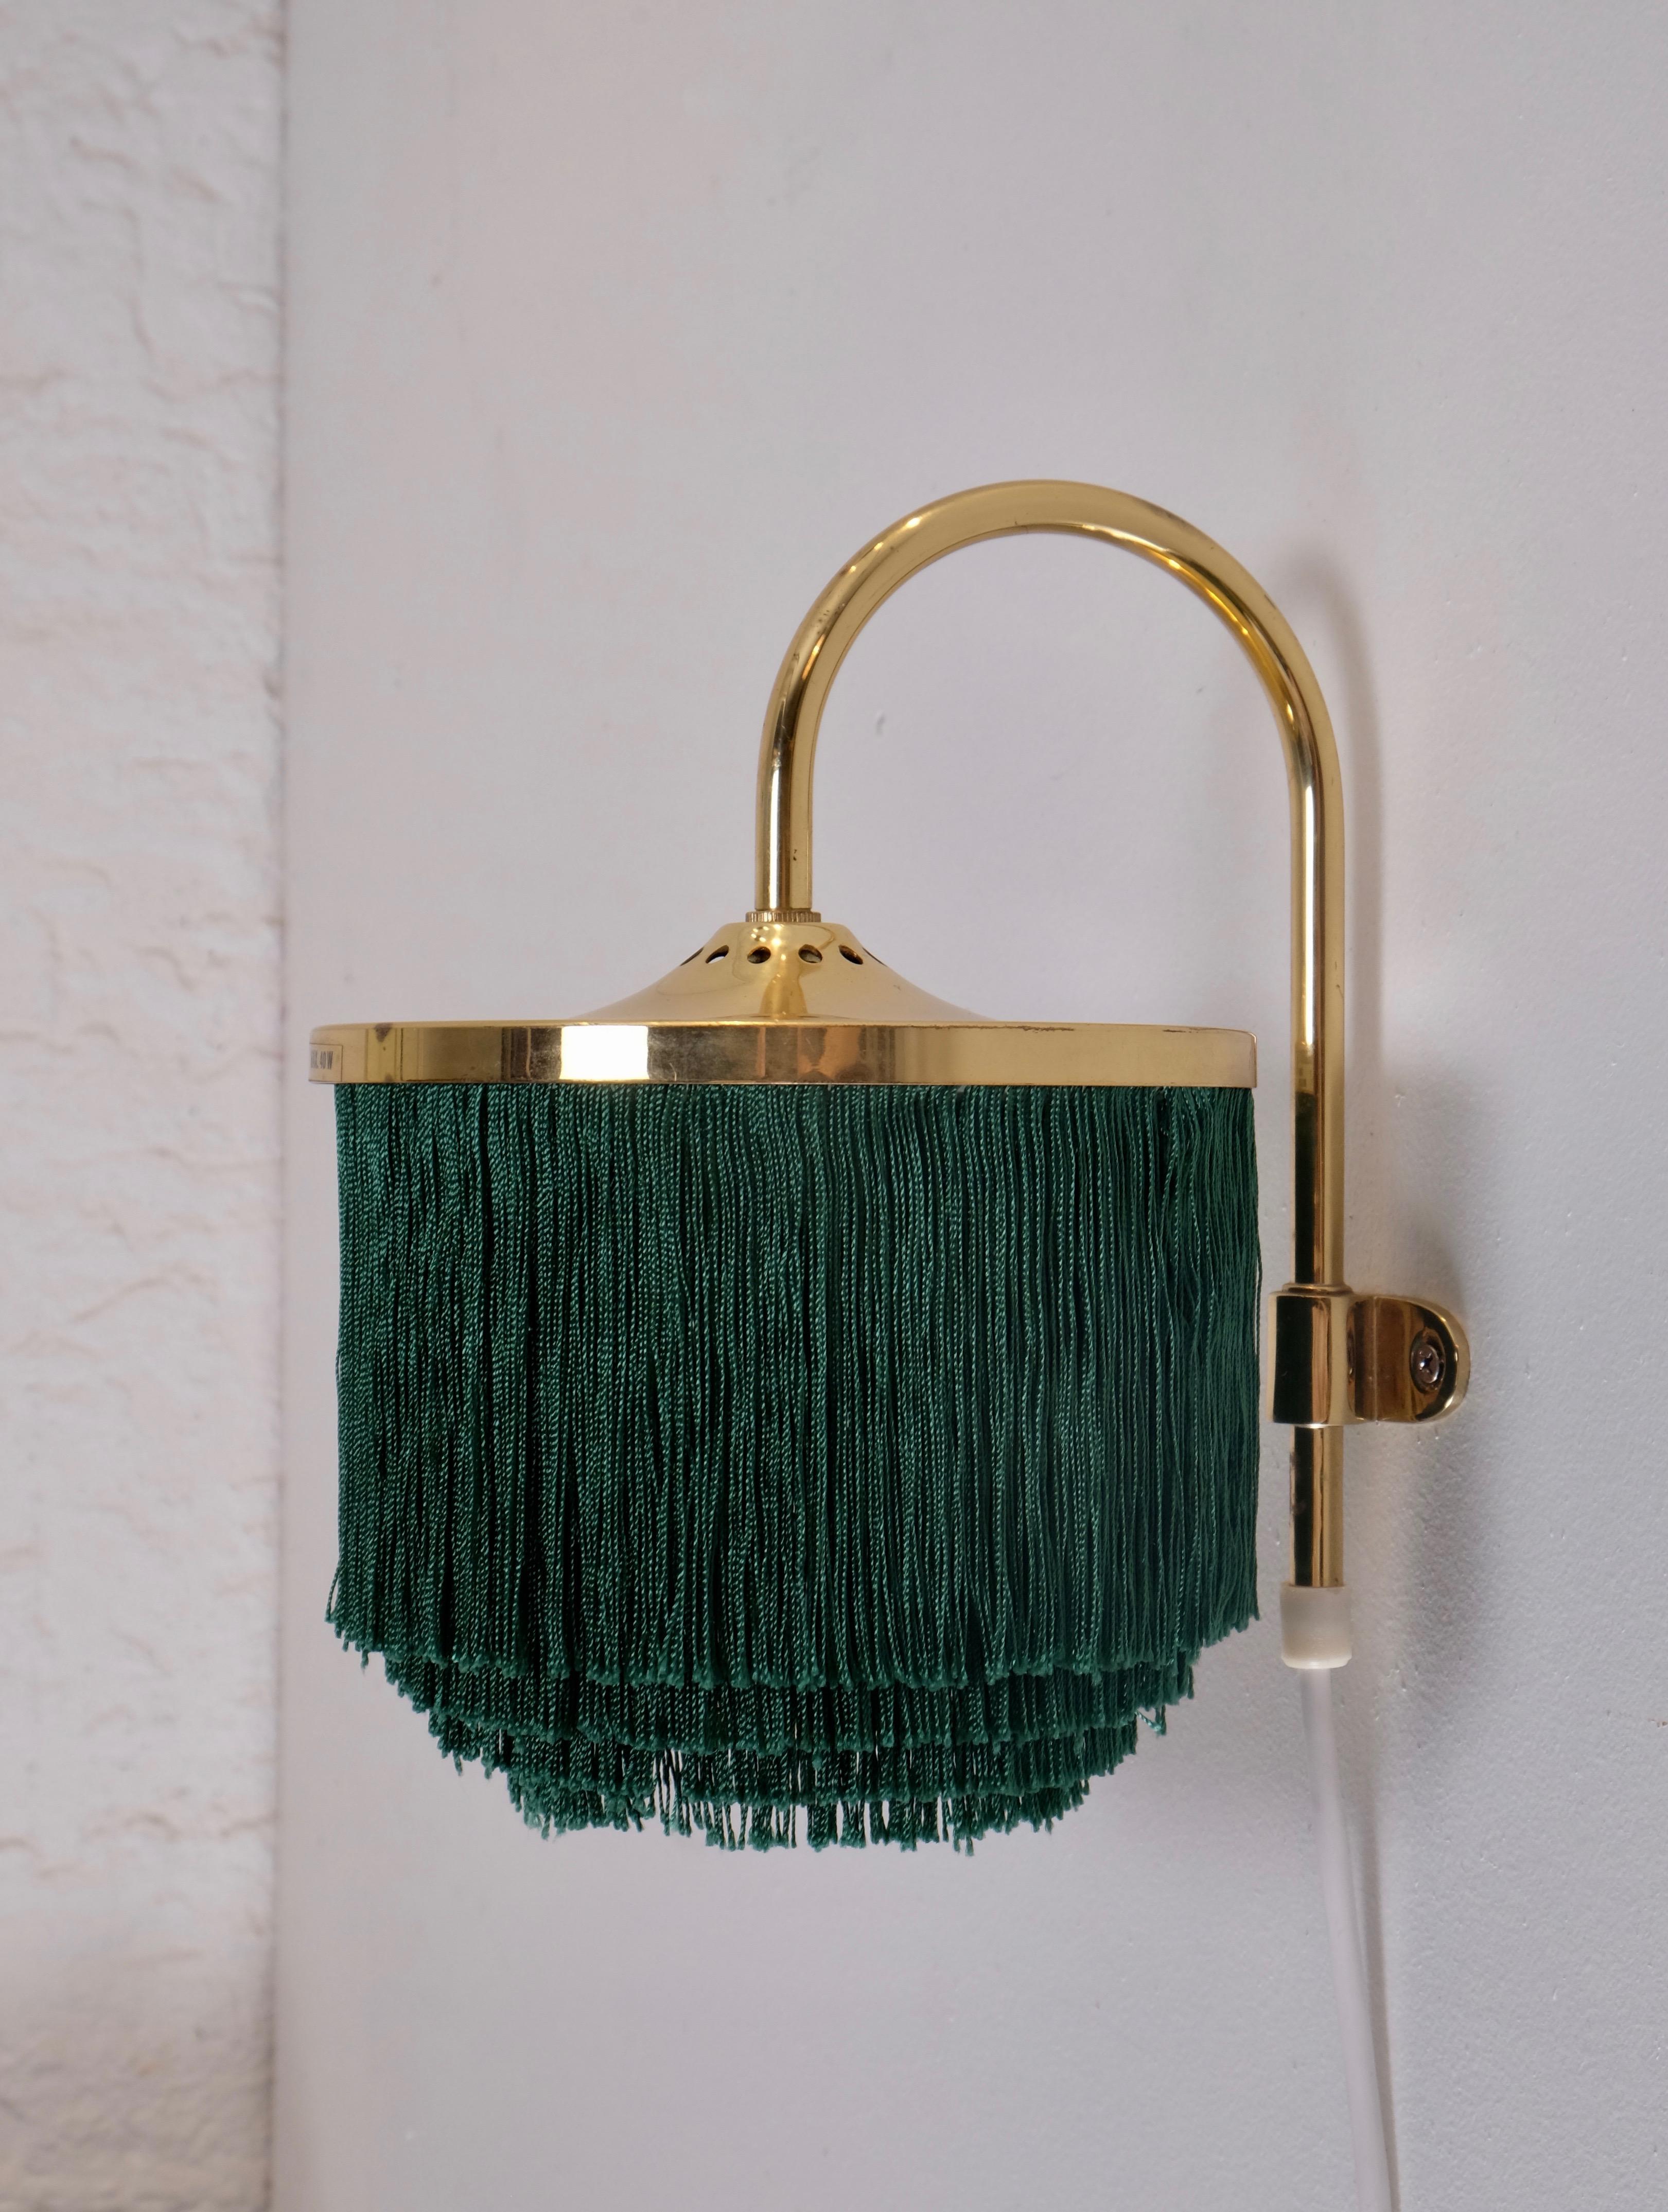 Swedish fringes wall light model V271 designed by Hans-Agne Jakobsson, produced in Markaryd, Sweden, 1960s.
Listed price is for a pair.

Measures: Diameter 16.5 cm
Distance from wall 19.5 cm
Top of arm to bottom of shade 23 cm
Height 16